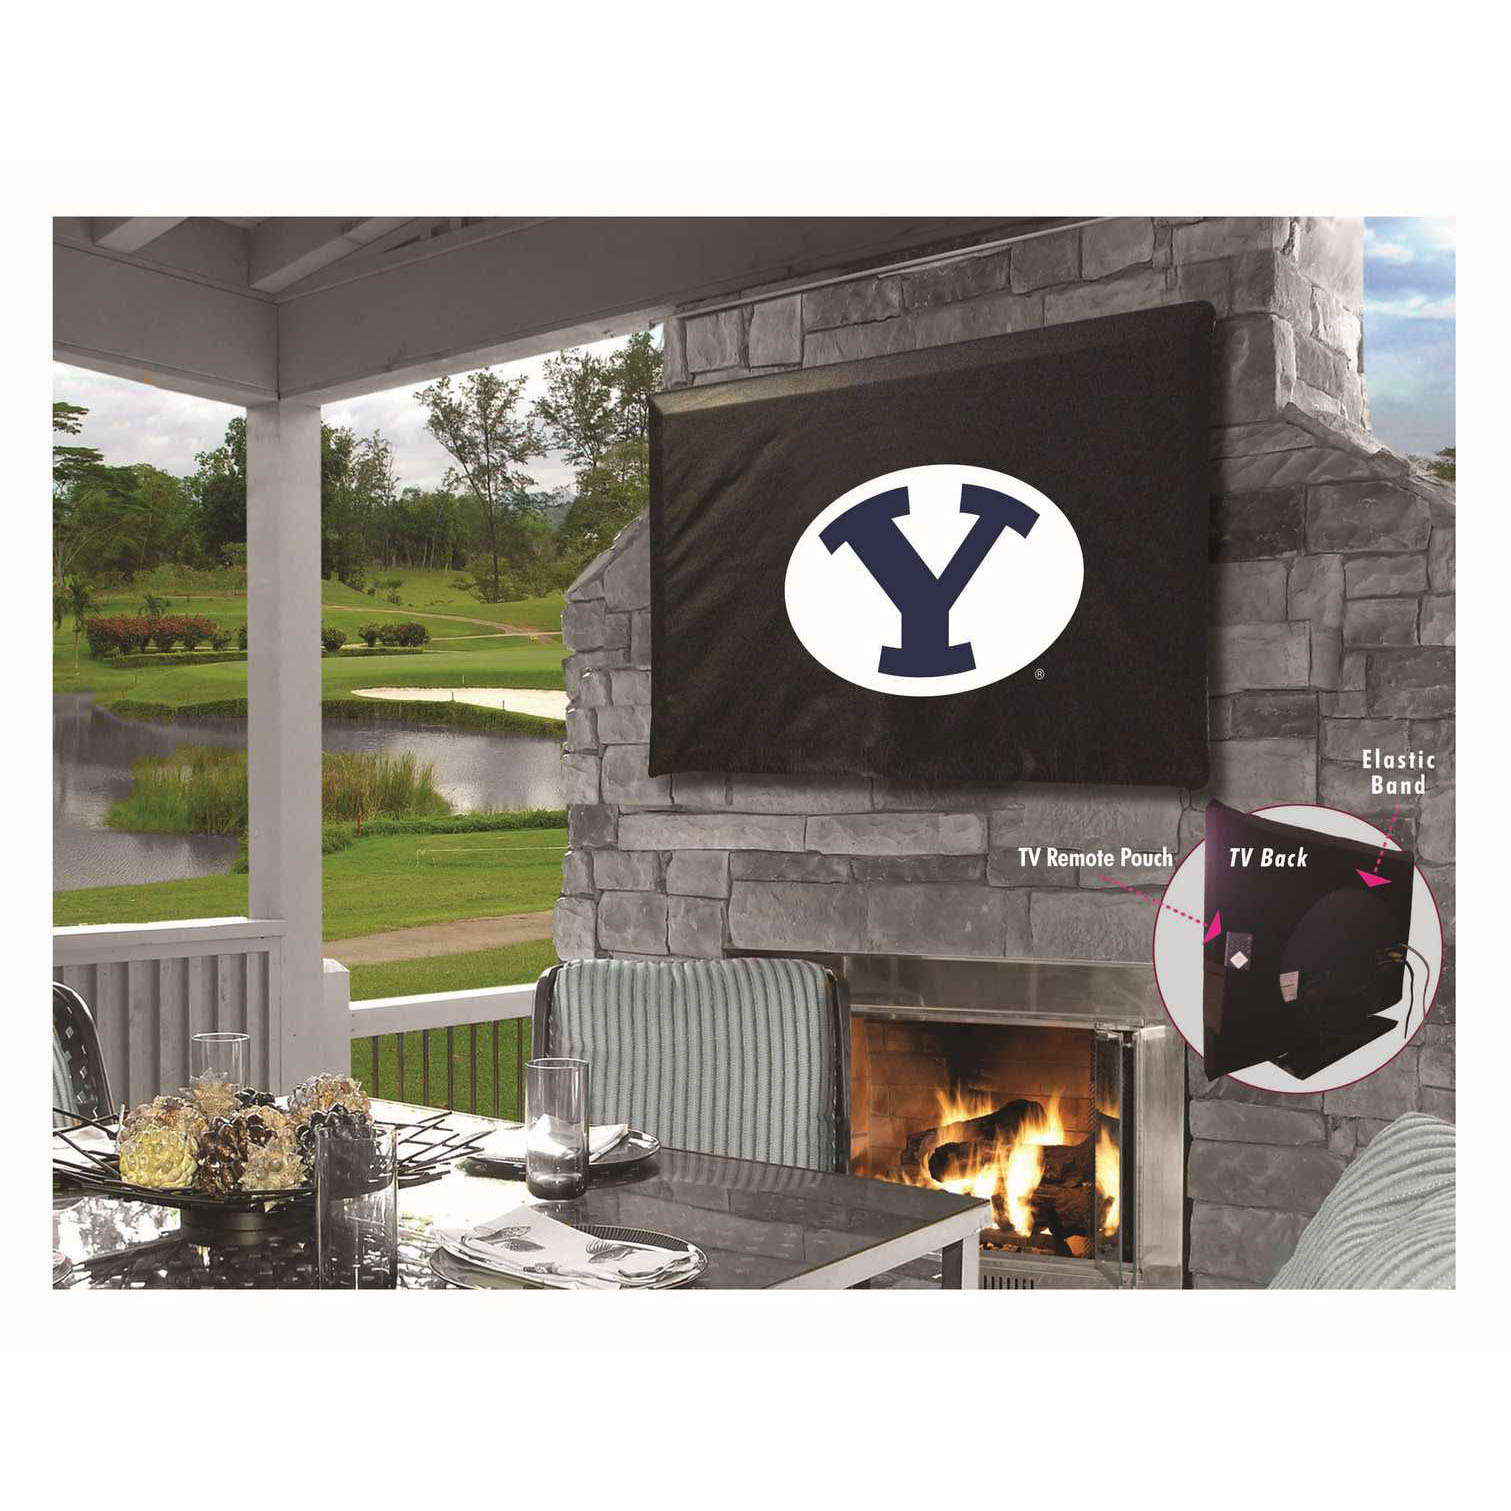 Brigham Young University Tv Cover